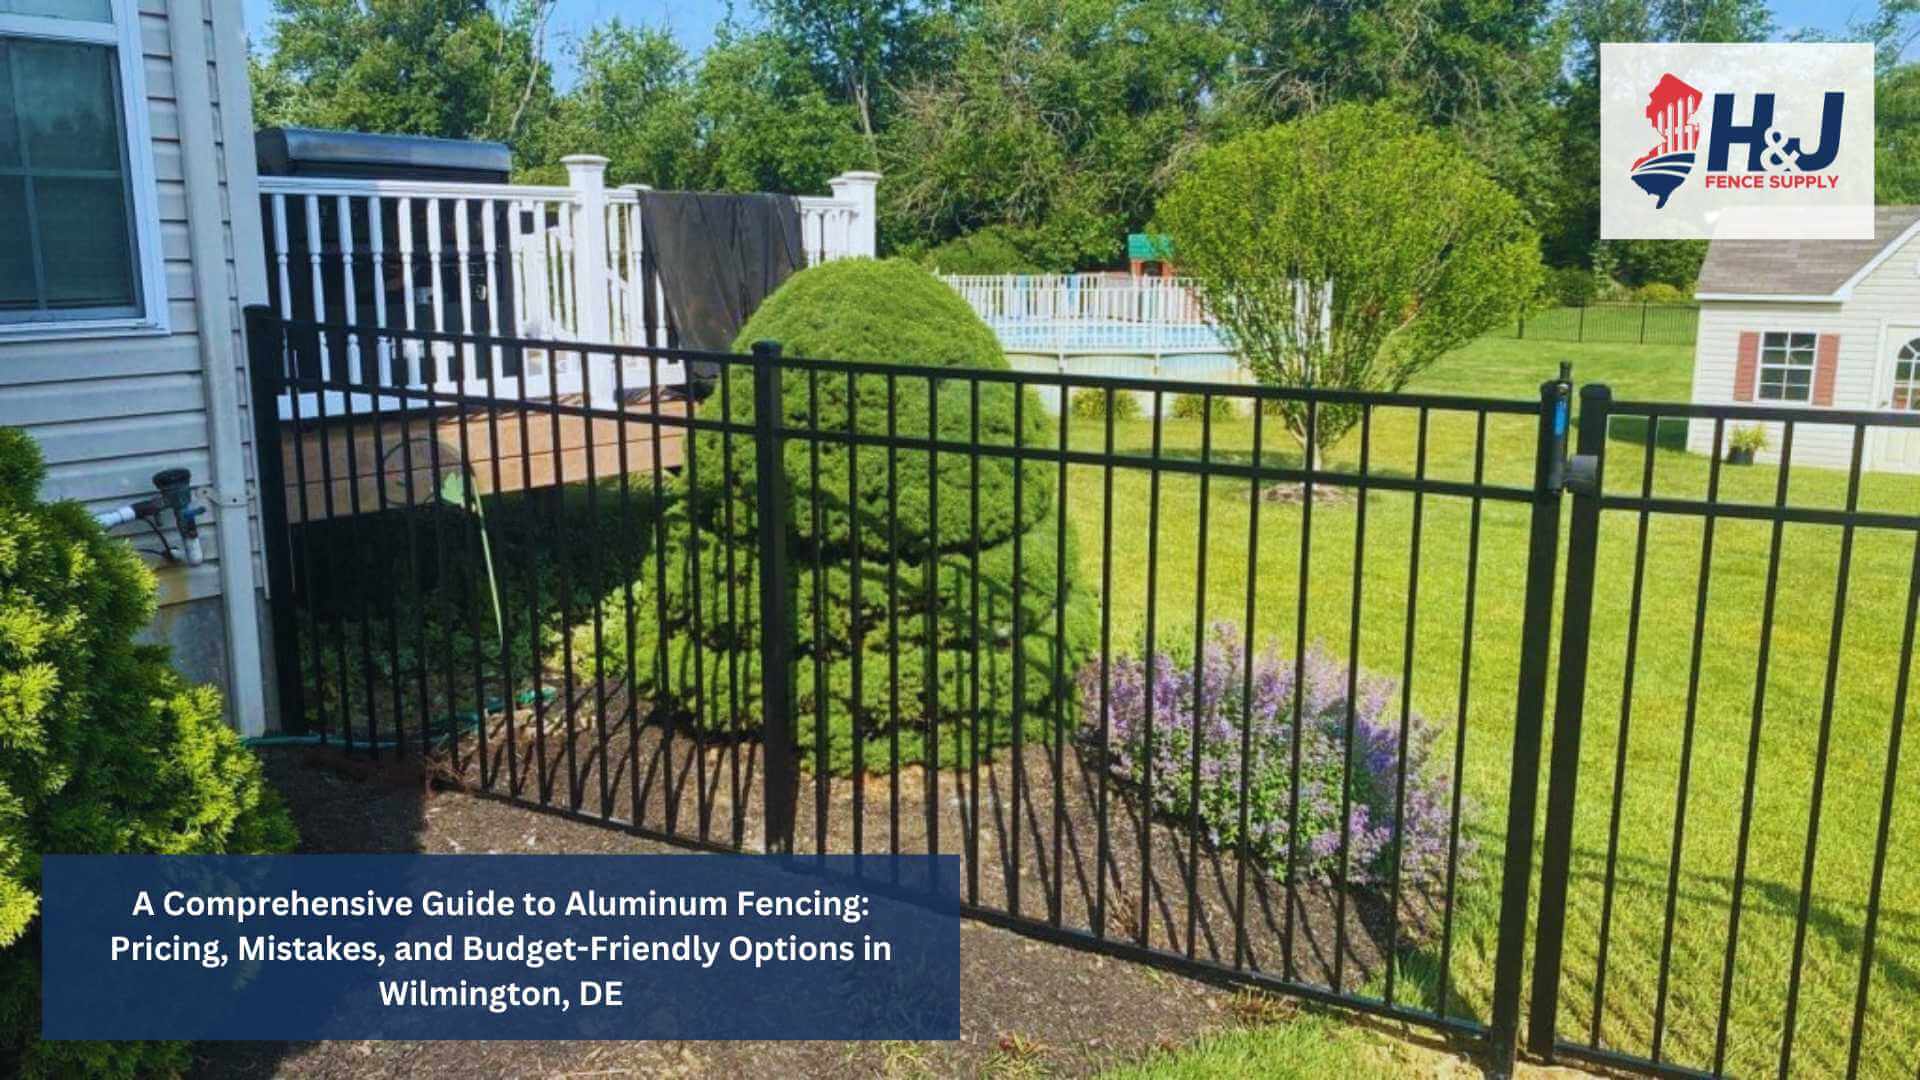 A Comprehensive Guide to Aluminum Fencing: Pricing, Mistakes, and Budget-Friendly Options in Wilmington, DE